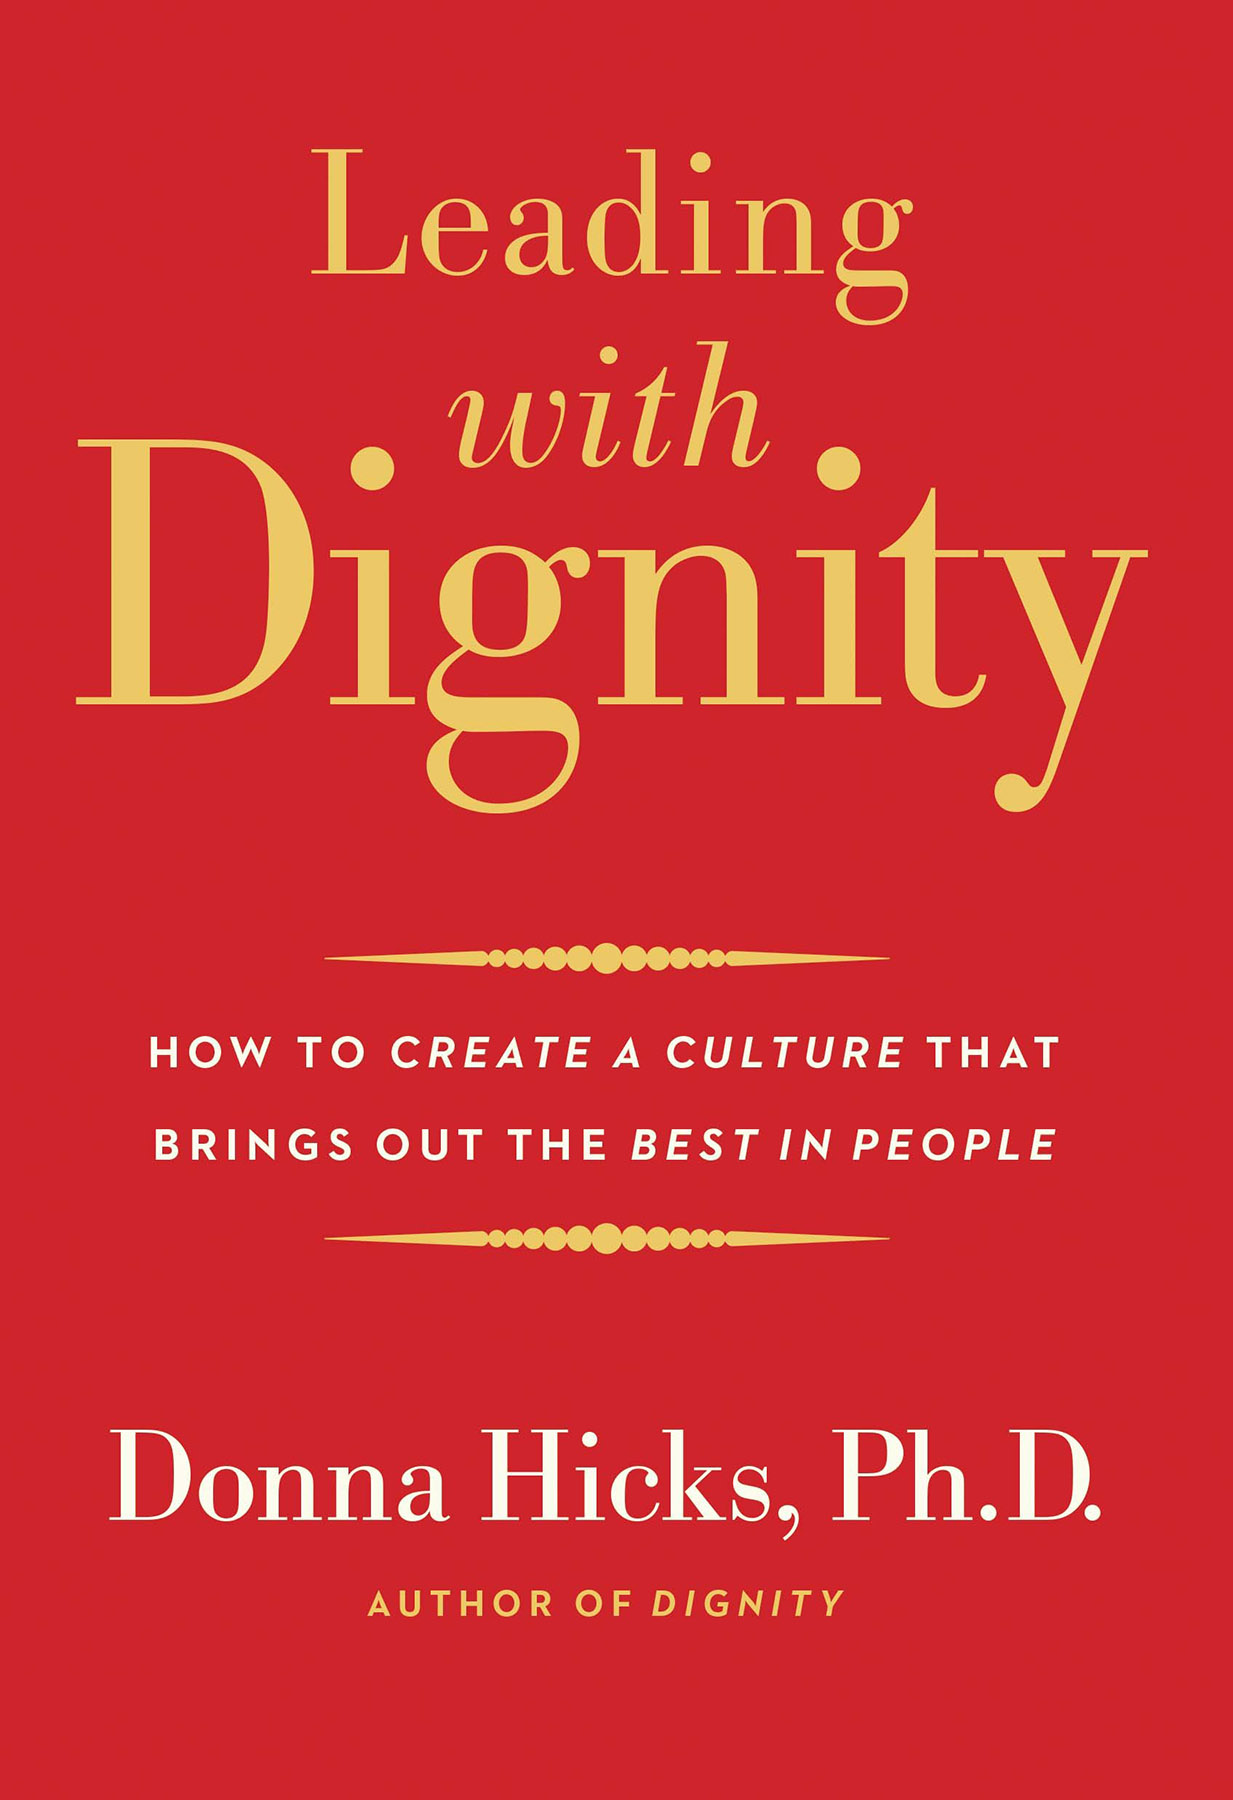 Leading with Dignity - Donna Hicks